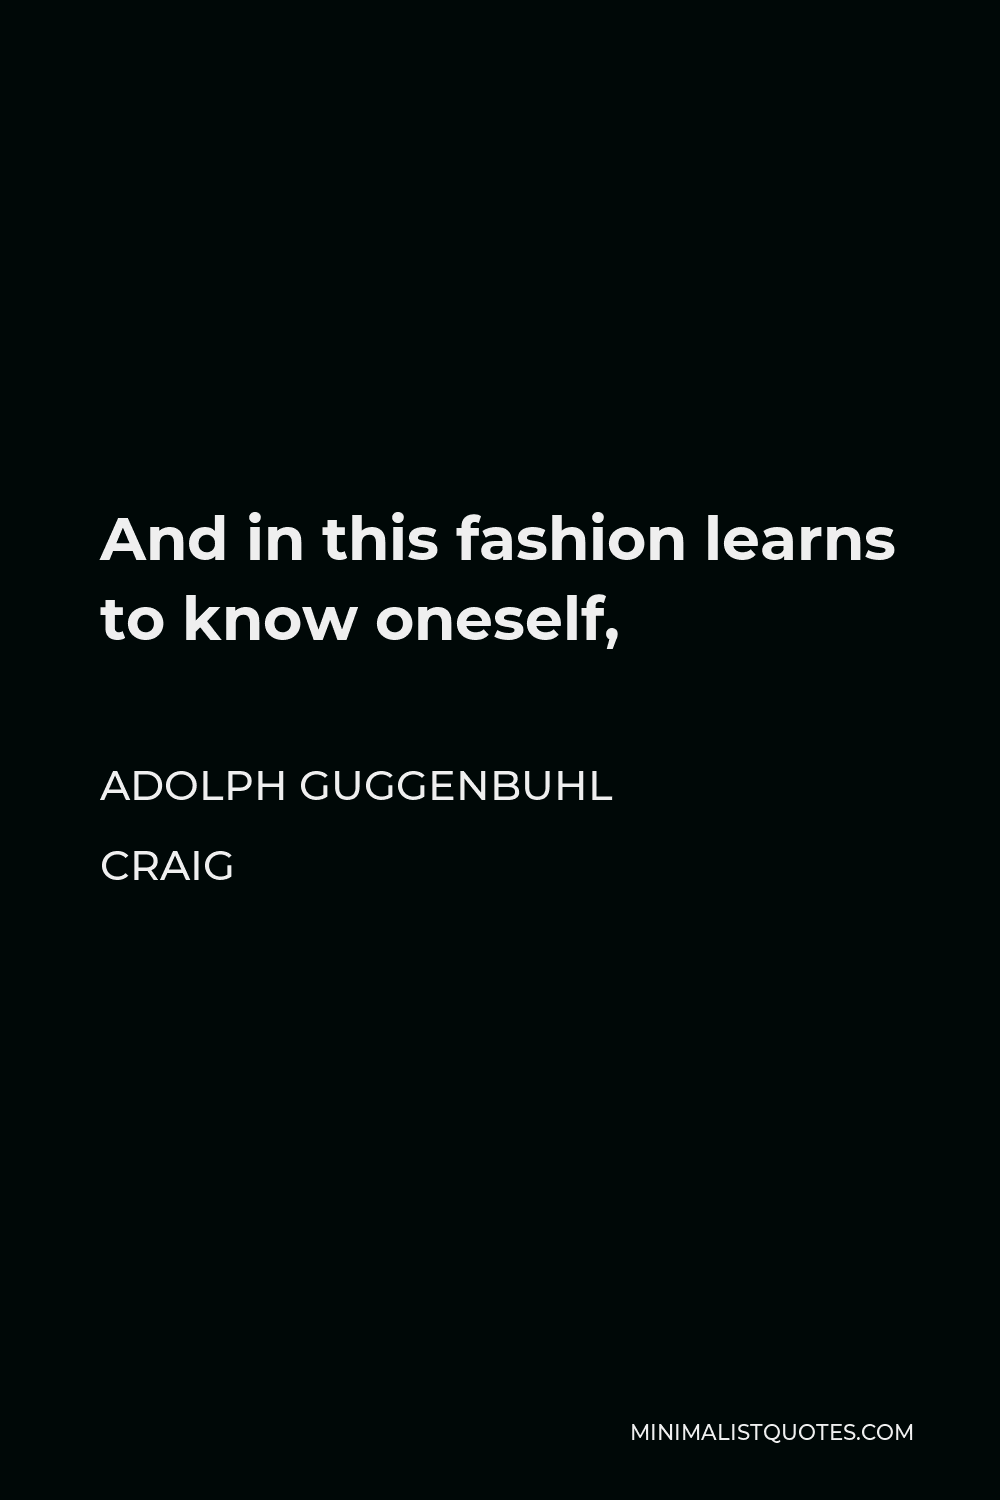 Adolph Guggenbuhl Craig Quote - And in this fashion learns to know oneself,